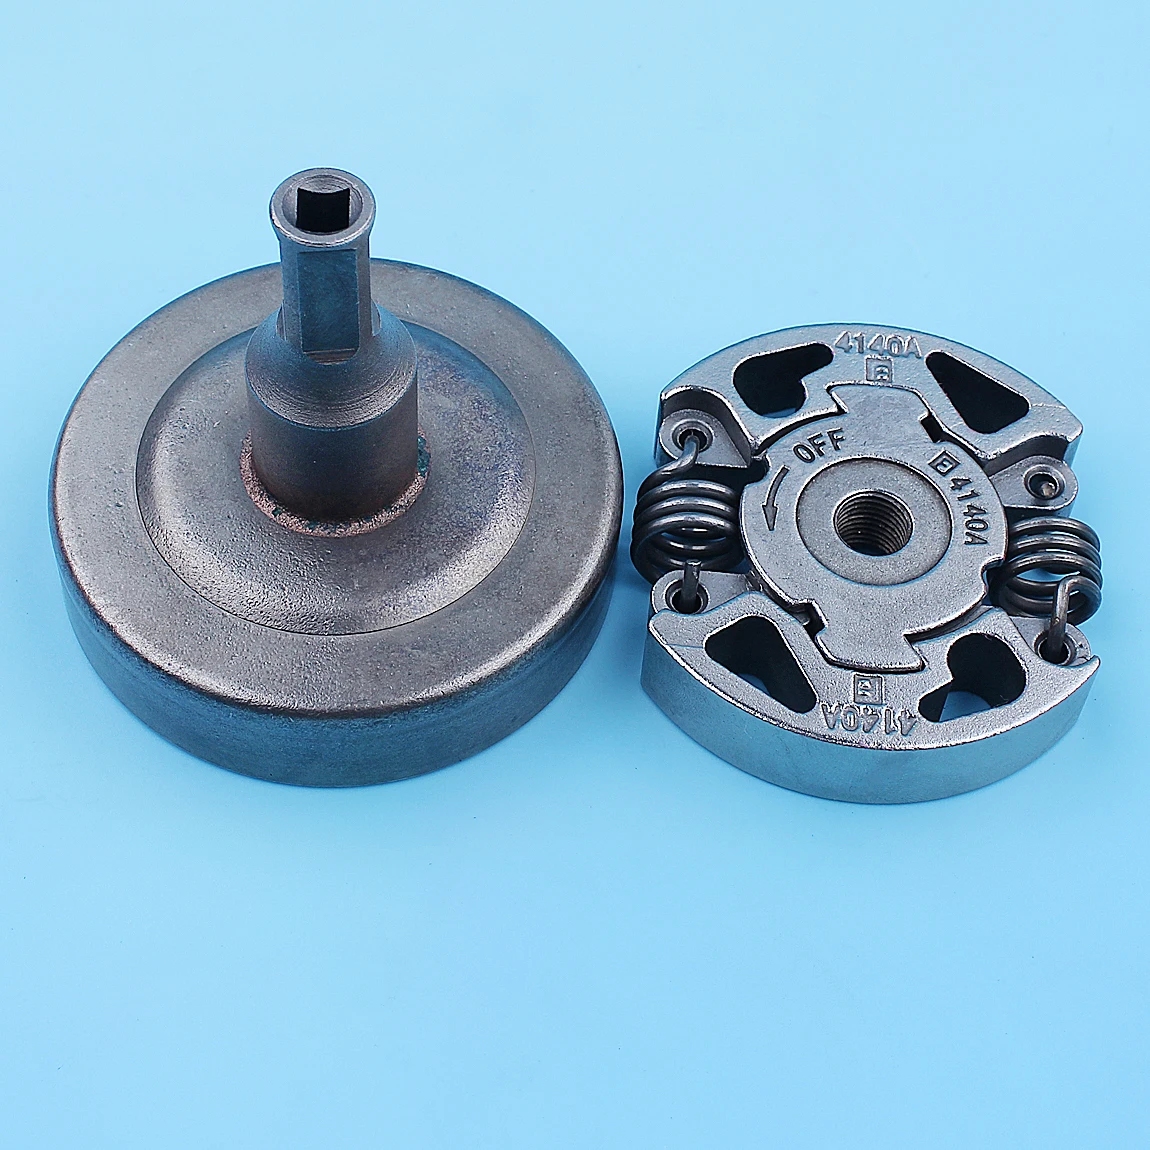 Clutch Drum Assy Kit Compatible with Stihl FS38 FS40 FS45 FS46 FS50 FS55 FS56 FS70 HL45 KM55 Replaces OEM 4140-160-2005 4140-160-2001 ENGINERUN Trimmer Clutch Drum and Clutch Shoe Assembly 